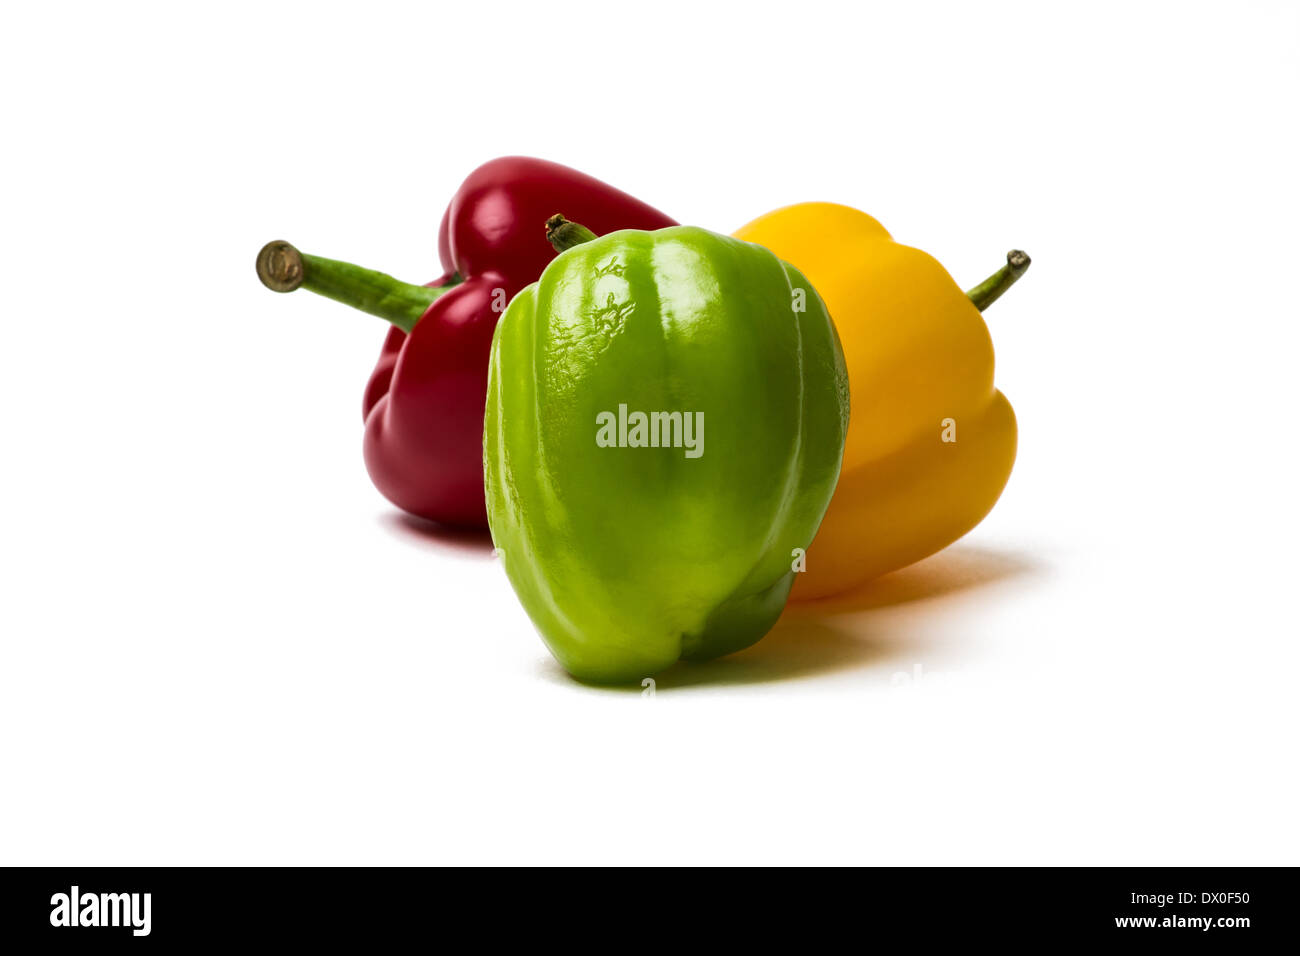 Three sweet peppers of red, yellow and green color. Green pepper is a main object. Two other peppers are behind it. Isolated. Stock Photo